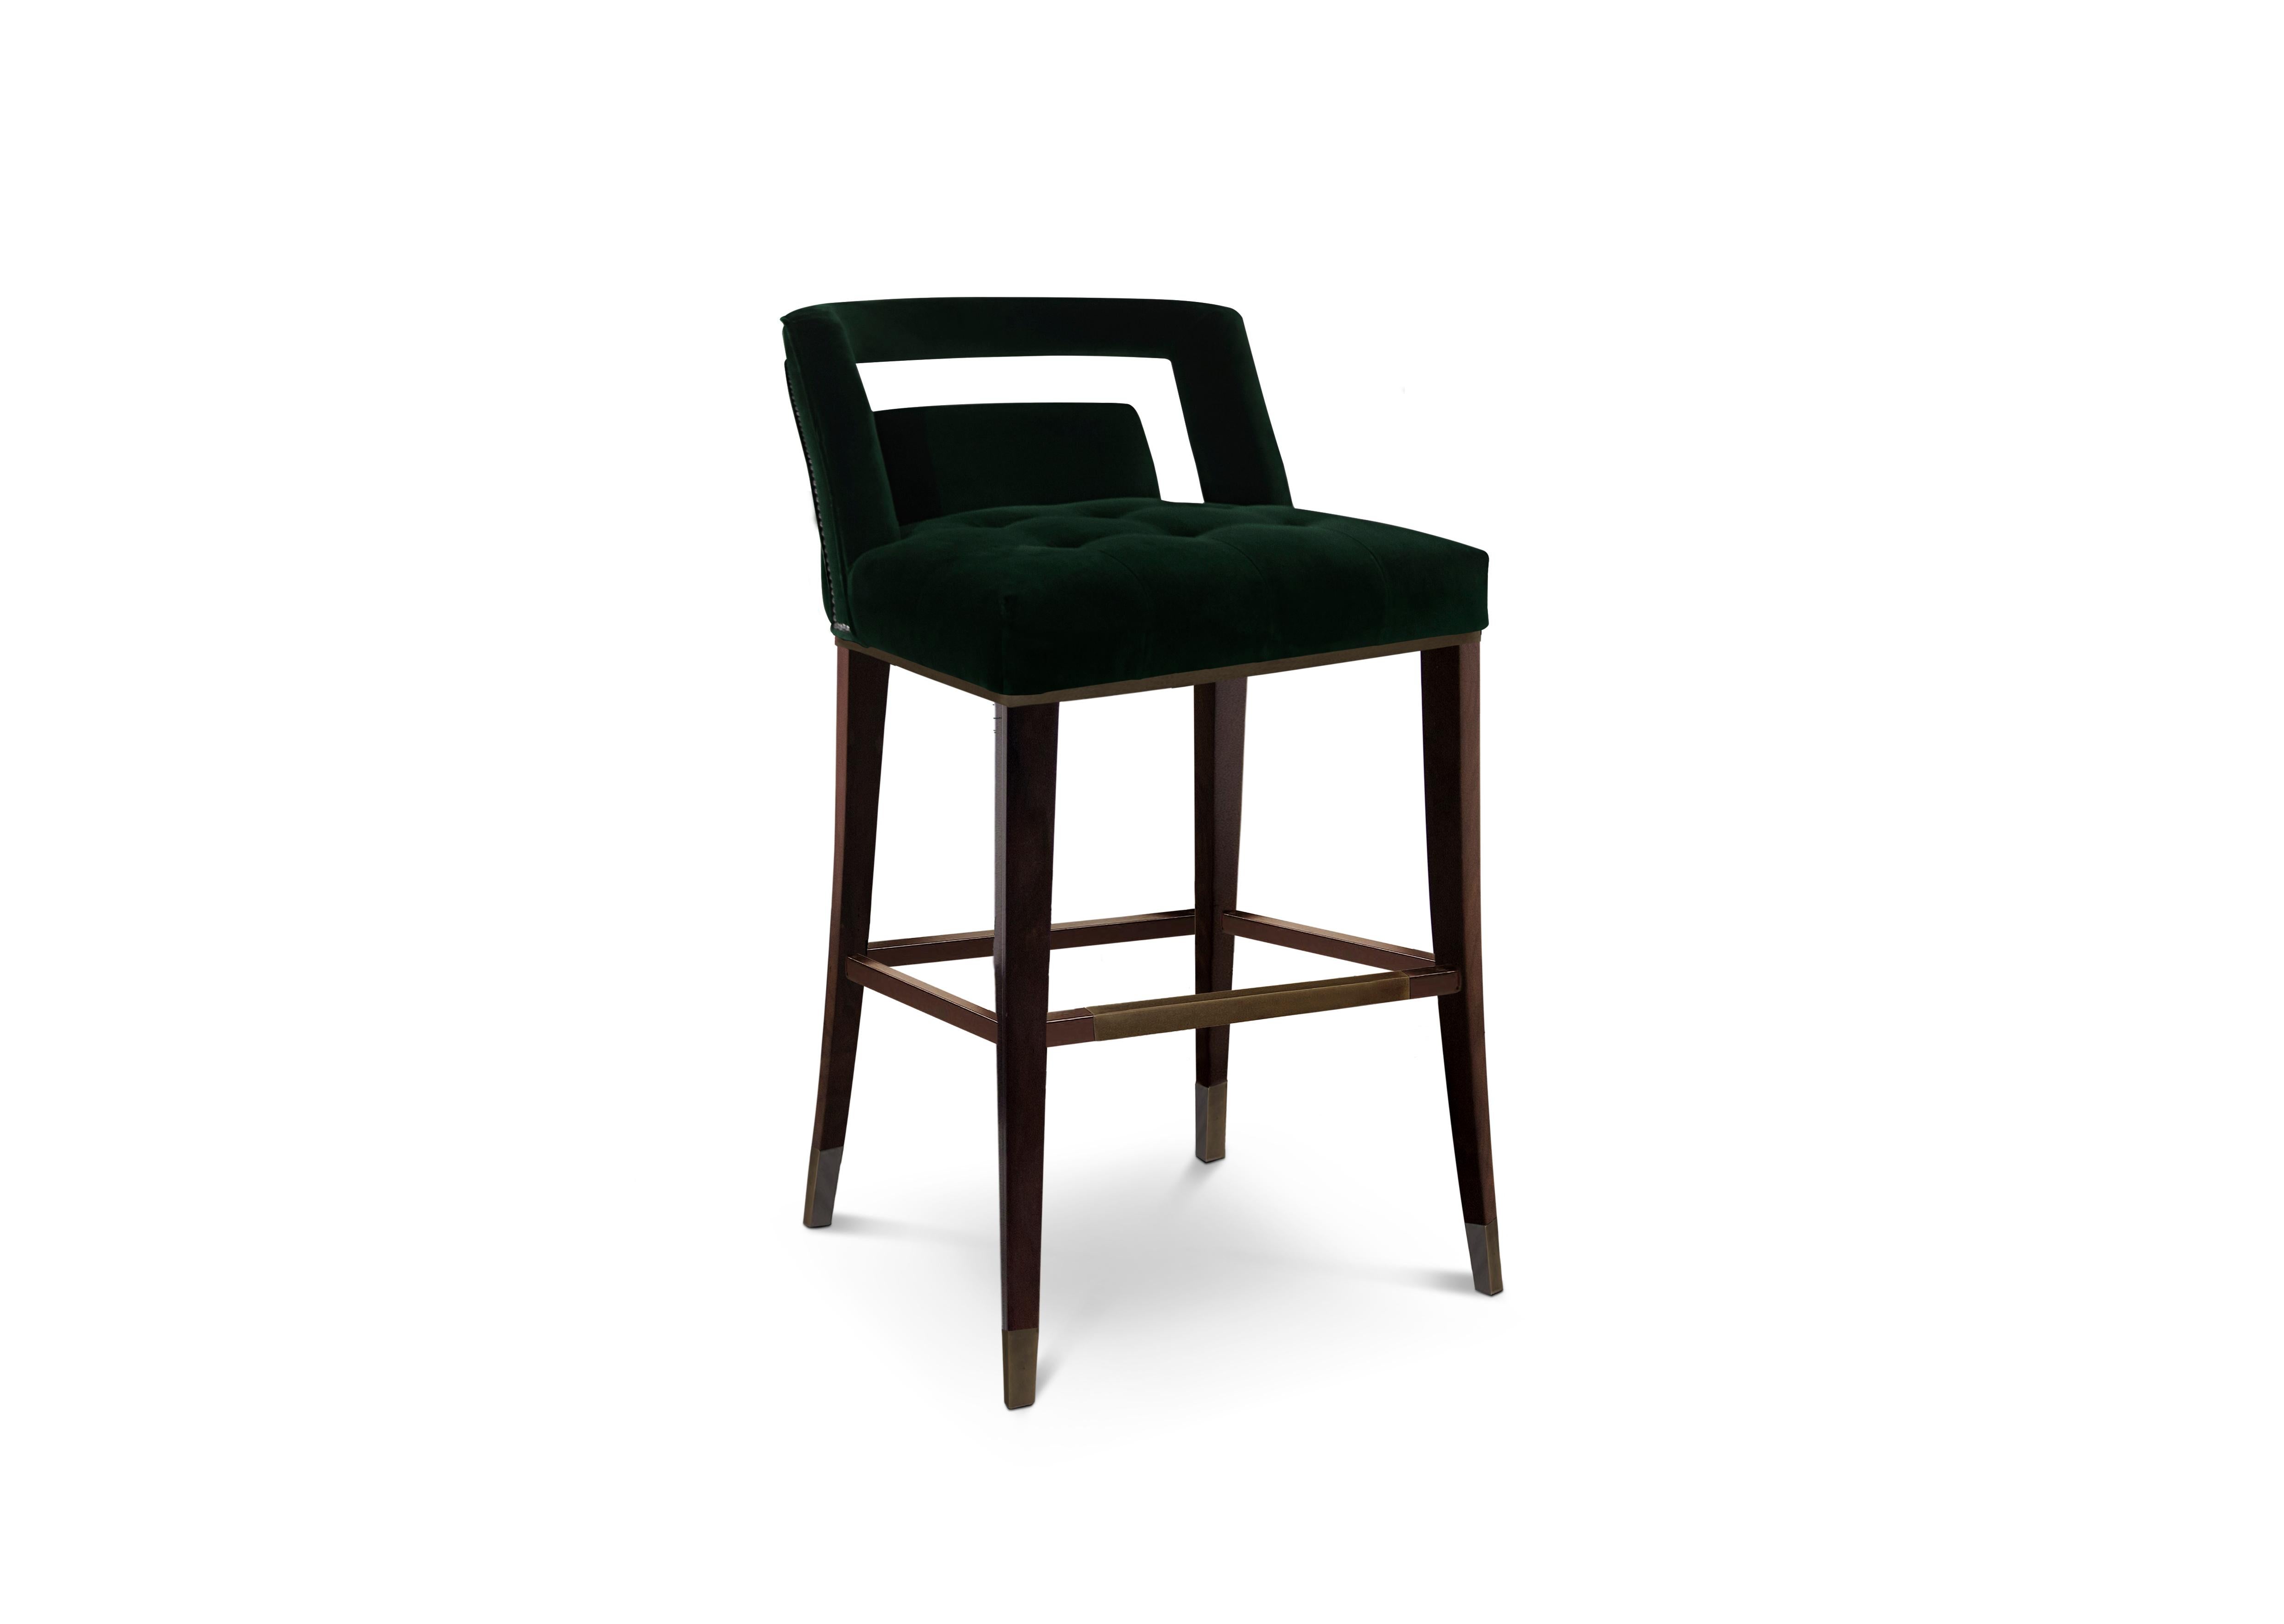 Guatemala was the stage of one of the most important discoveries in the twentieth century - the Naj Tunich. Inspired by it is NAJ Counter Stool, a contemporary bar chair upholstered in cotton velvet with nickeled nails and legs in ash with walnut